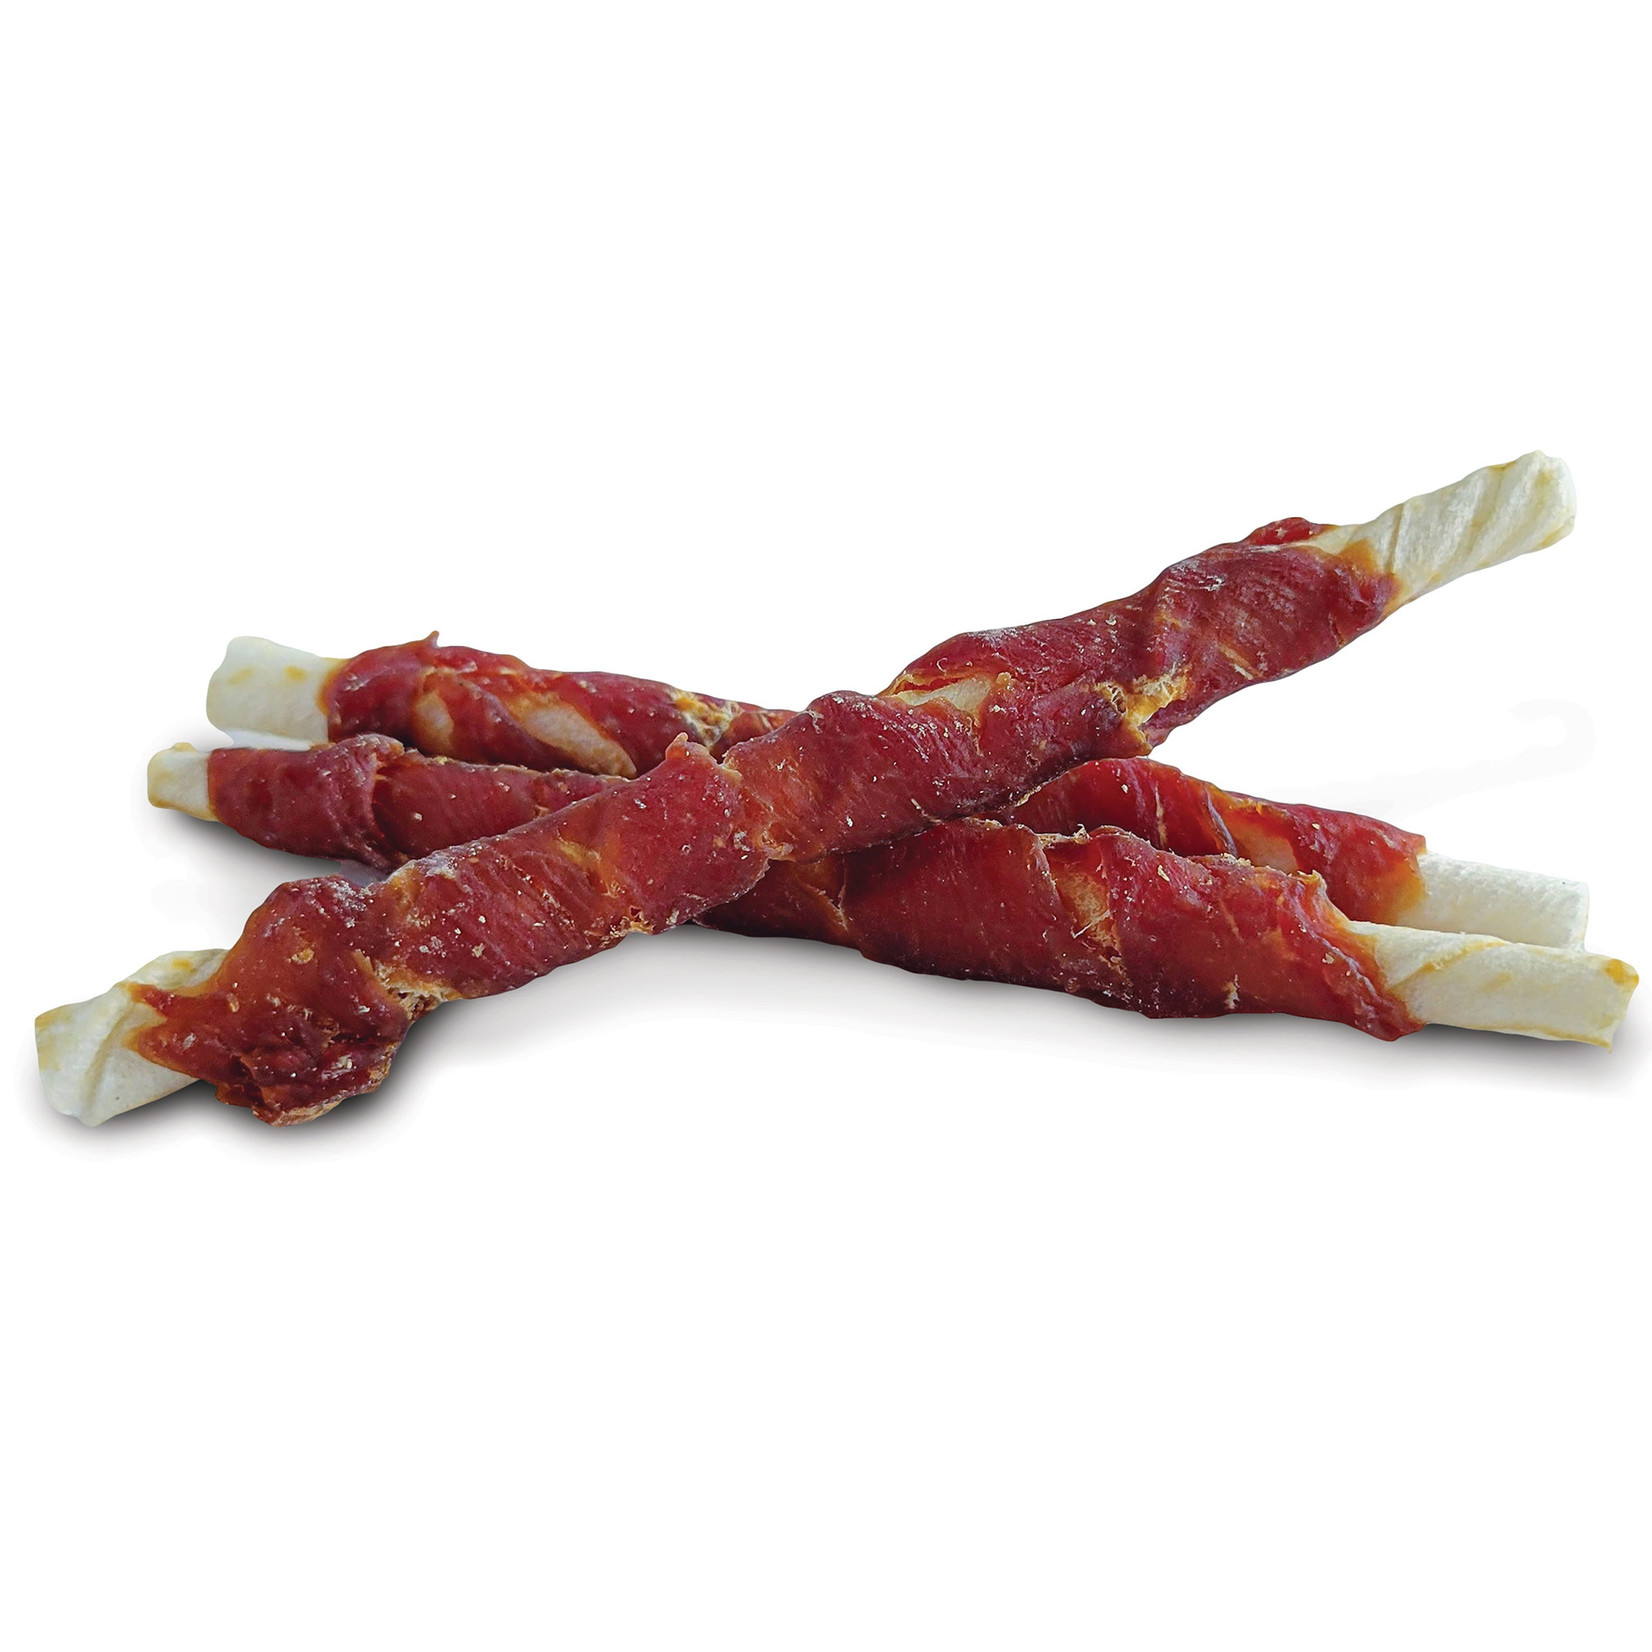 DOG IT Dogit Snack Bar Rawhide - Duck -Wrapped Twists - 6 pcs (10 cm/4 in)